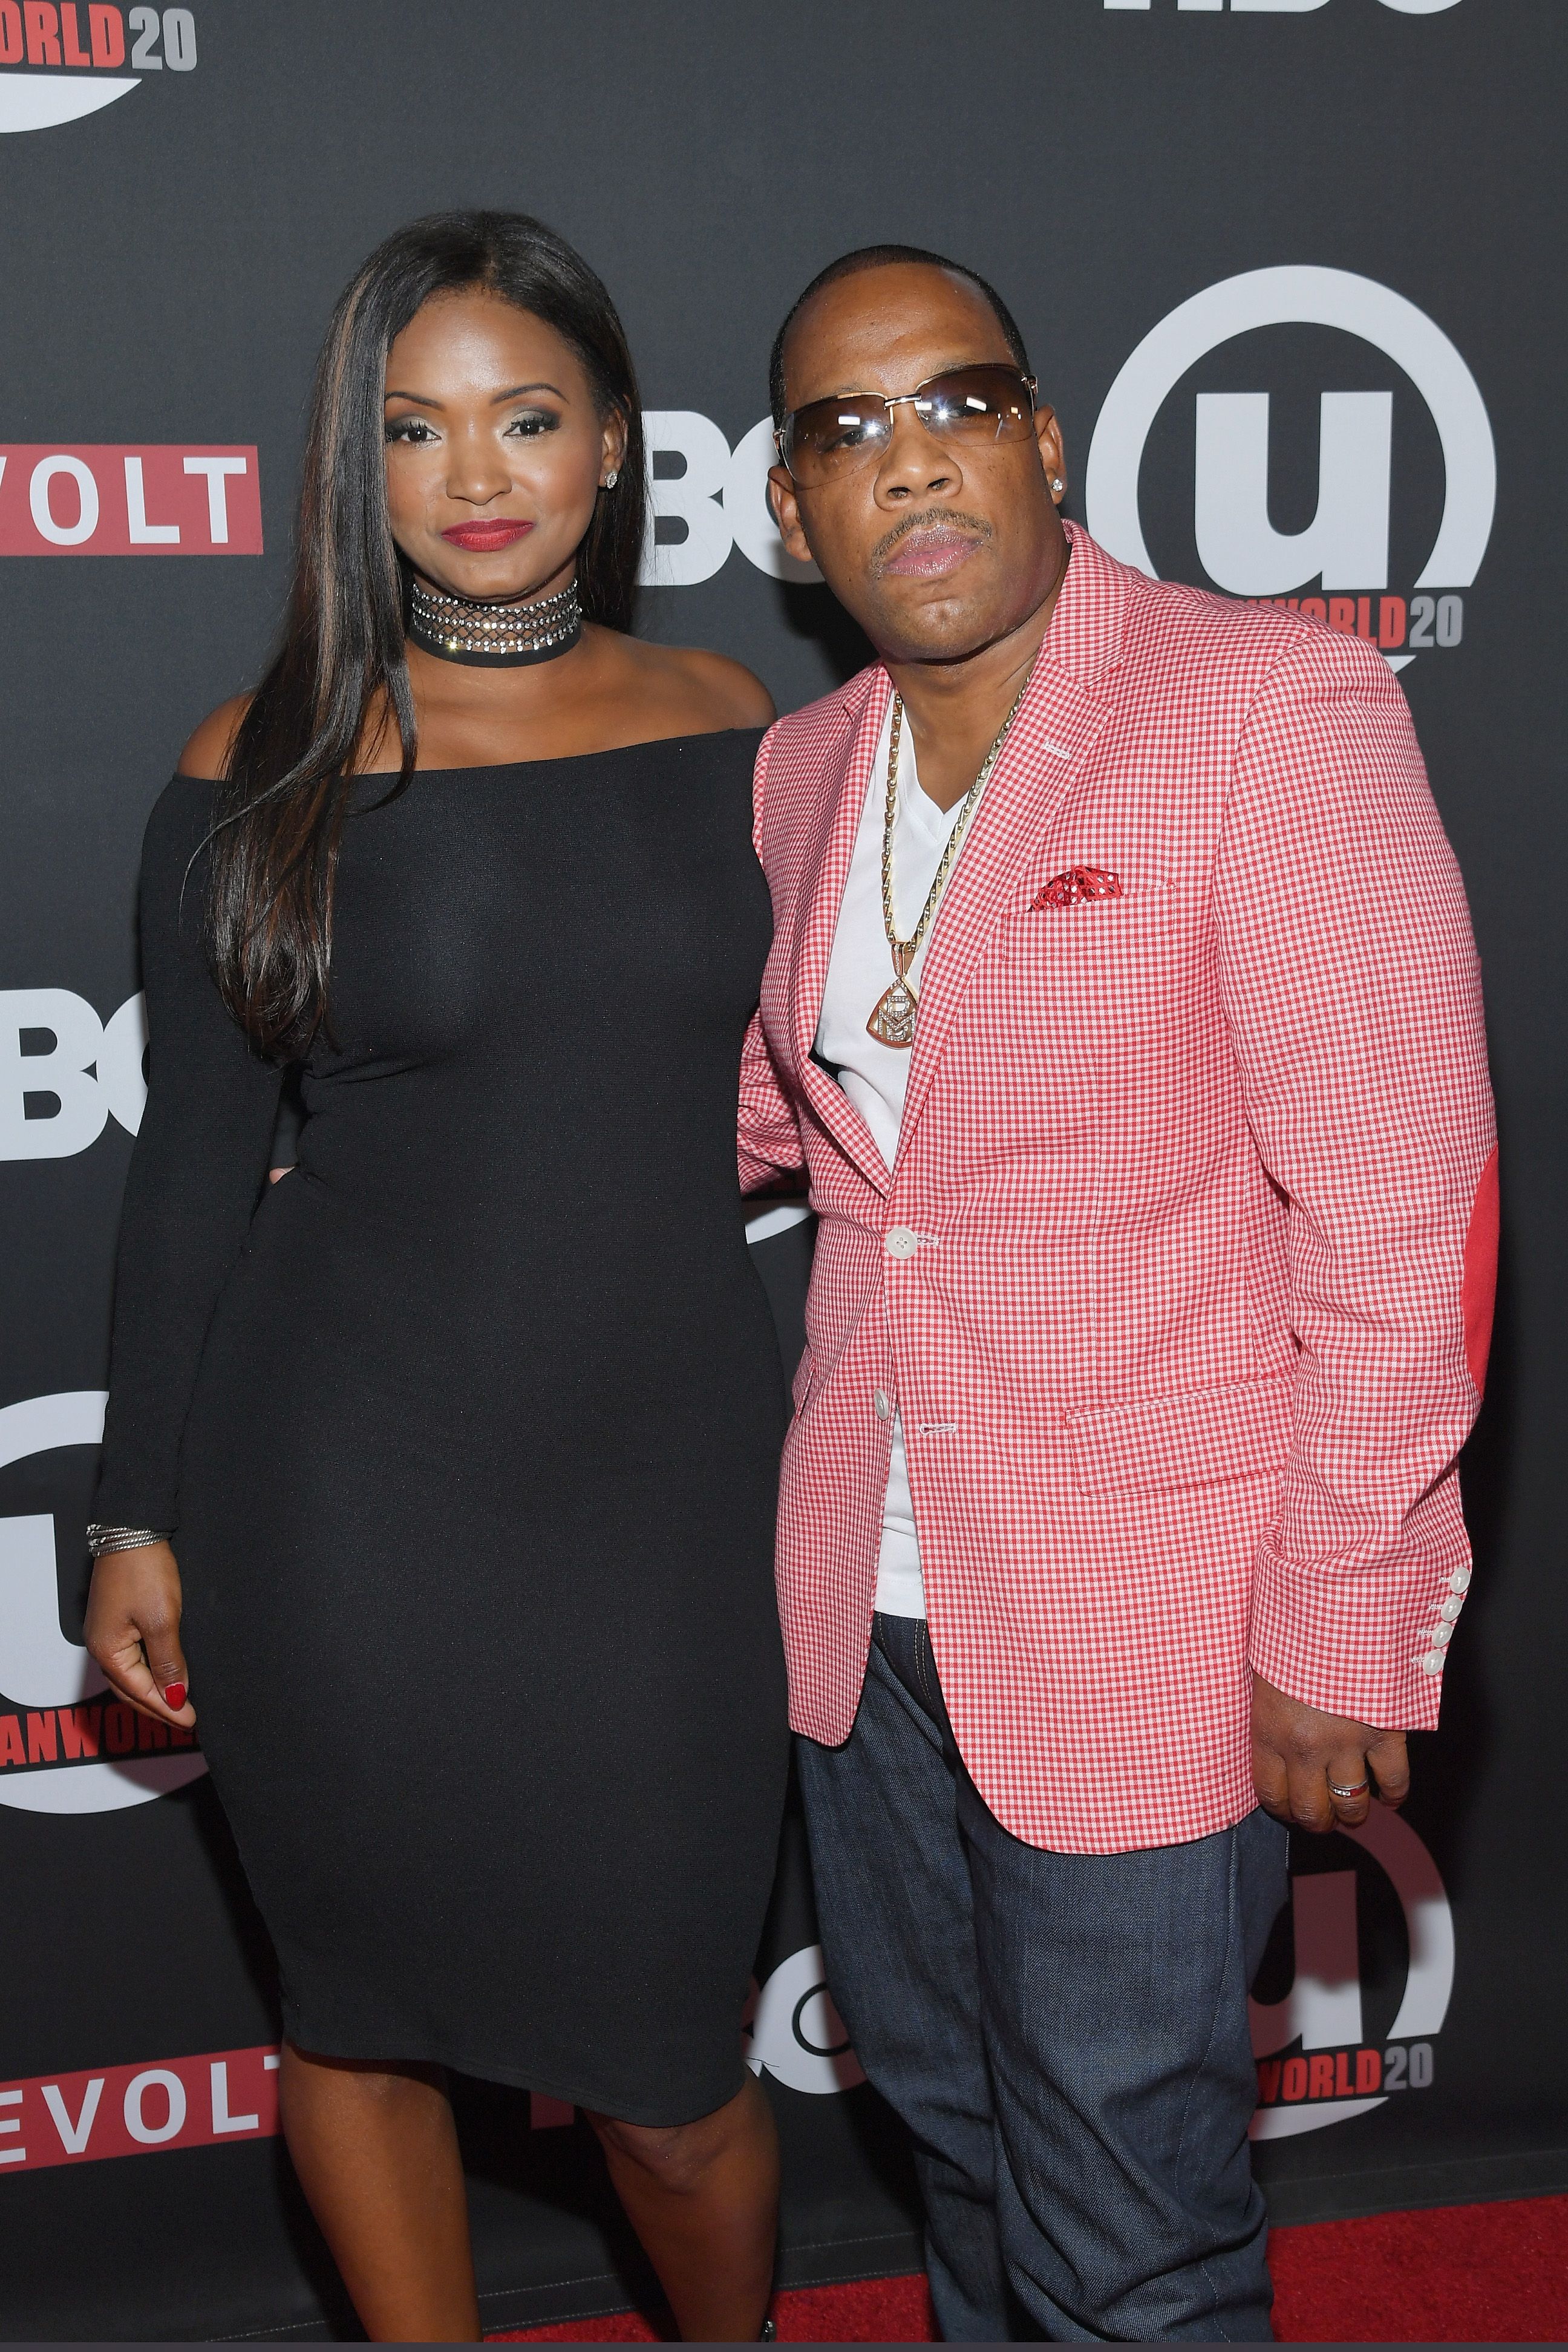 Teasha Bivins and Michael Bivins at the 20th Annual Urbanworld Film Festival in 2016 | Photo: Getty Images